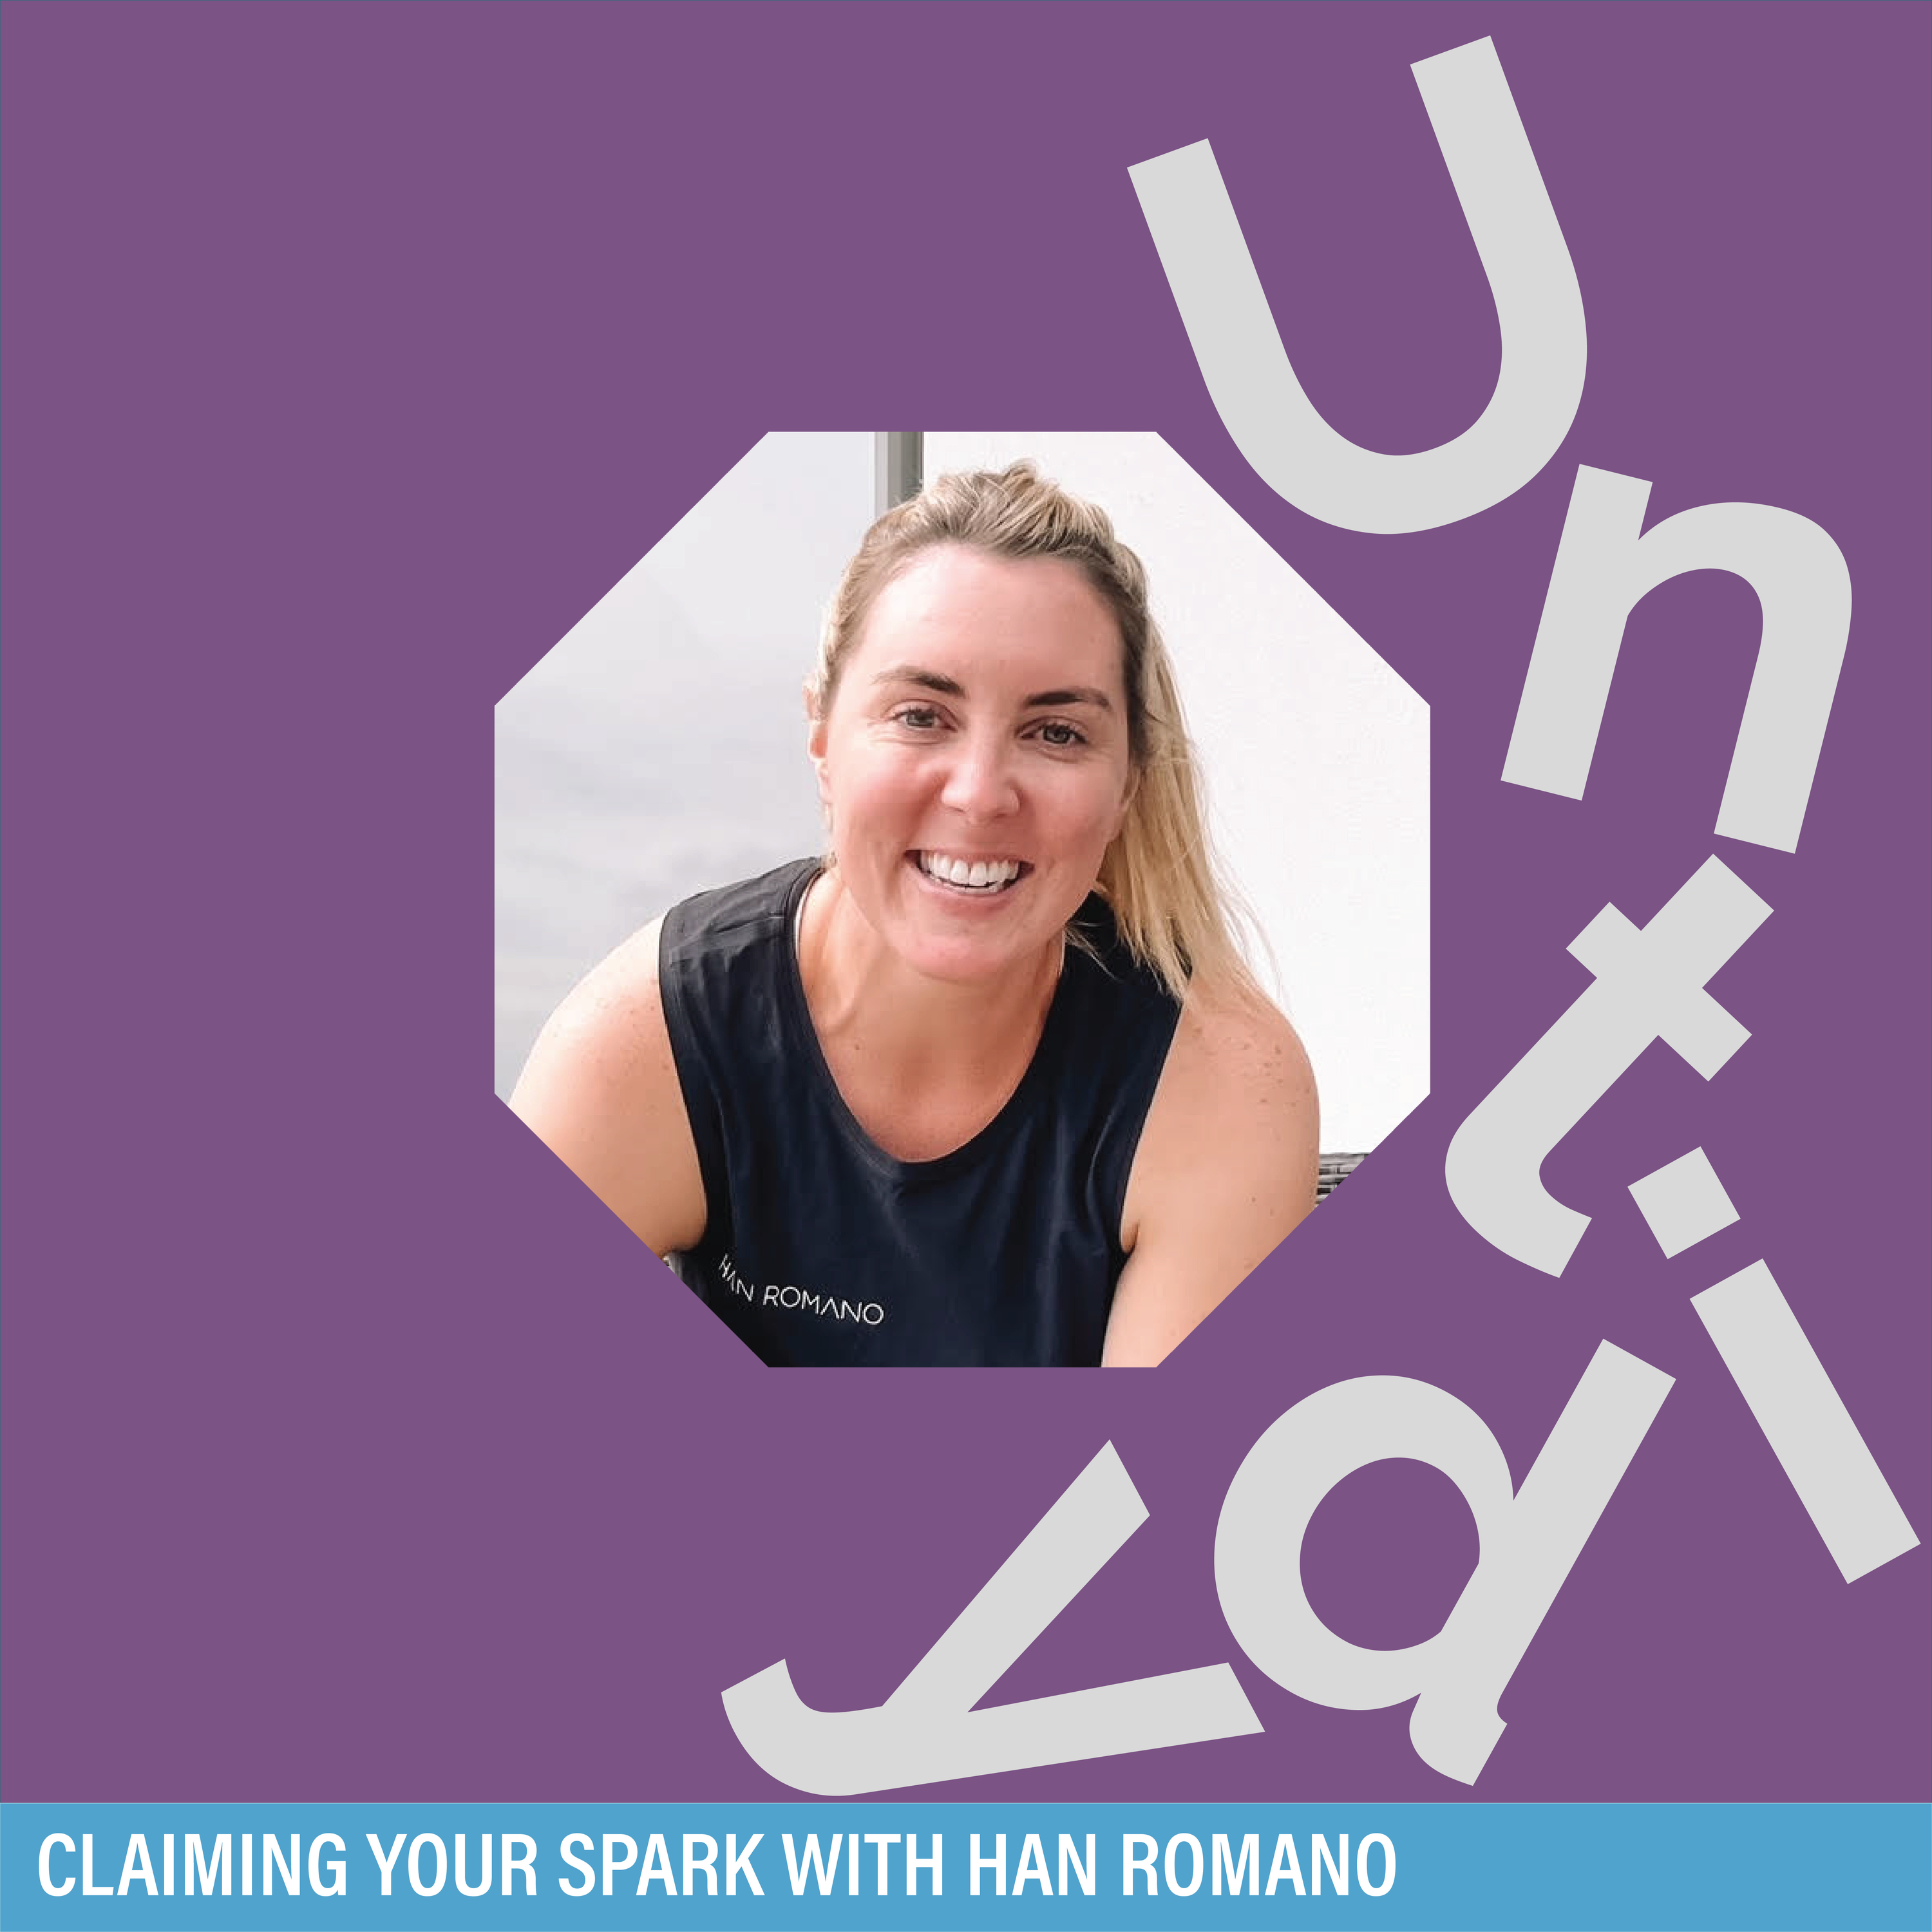 Claiming your spark with Han Romano